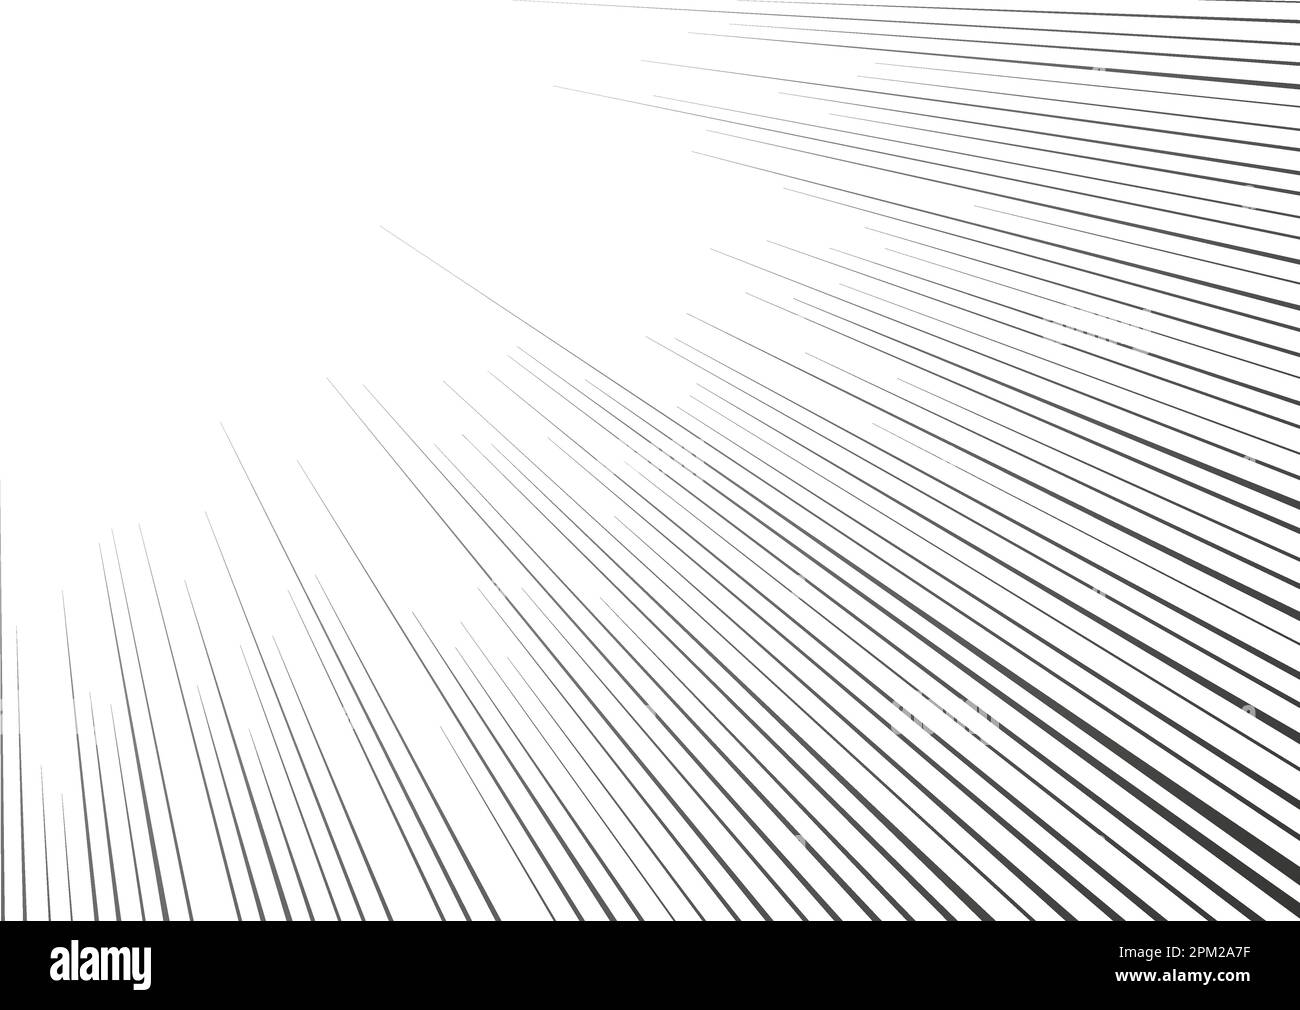 Radial Line Drawing. Action, Speed Lines, Stripes Stock Vector -  Illustration of graphic, fight: 187946130